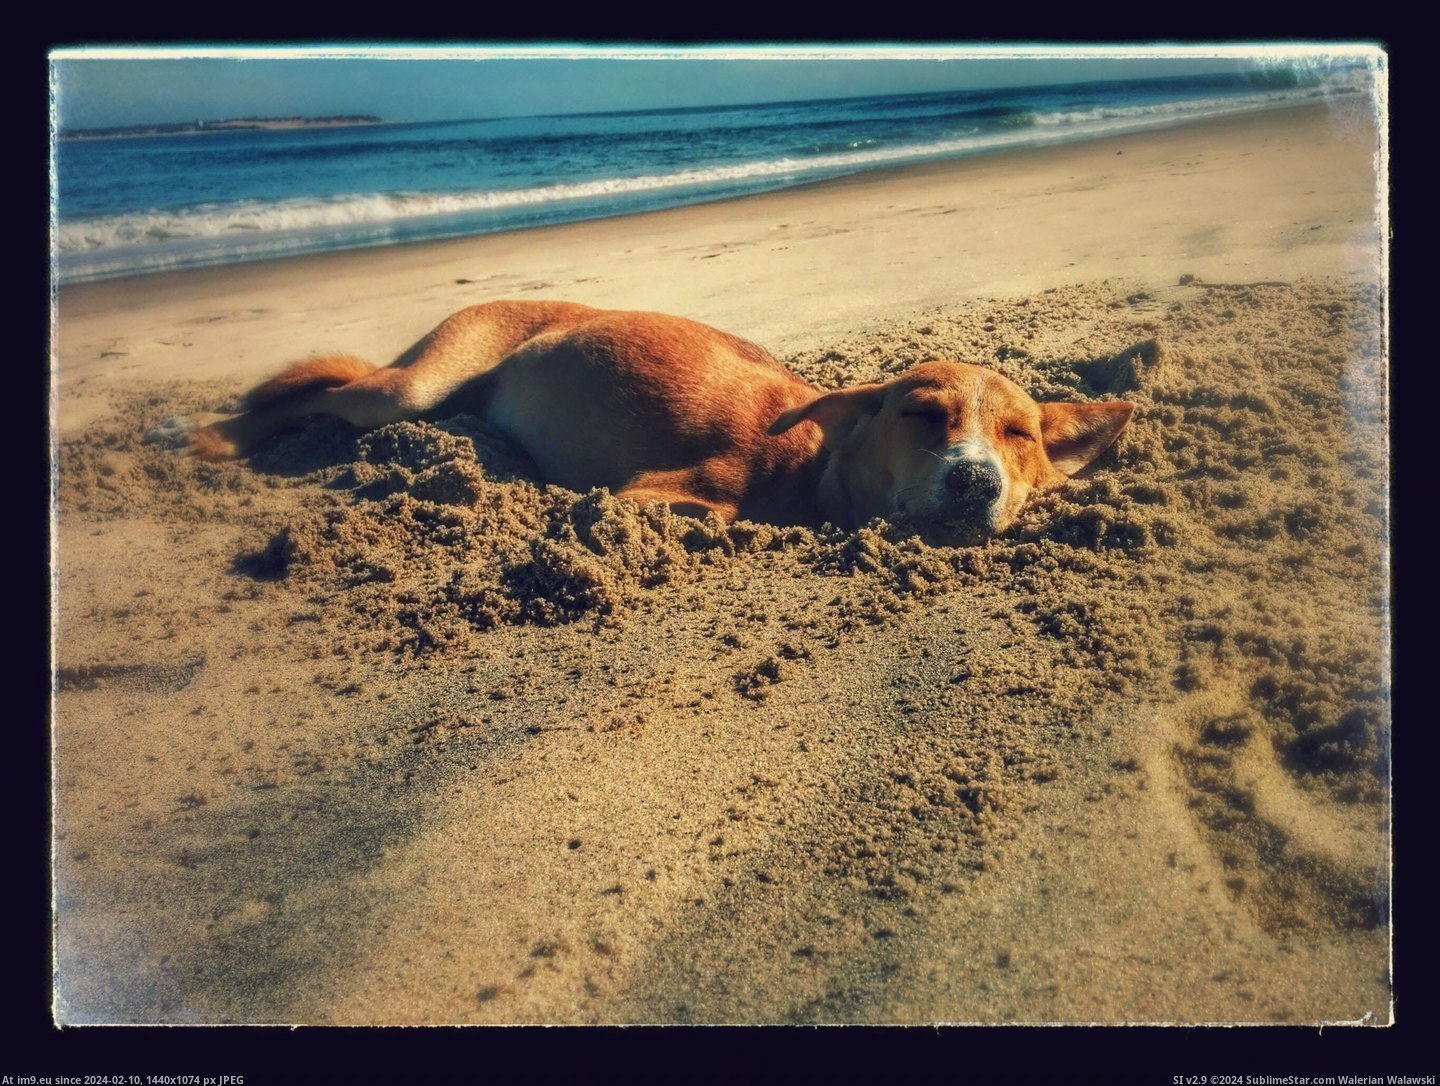 #Guy #Beach #Hole #Lanka #Sri #Dug #Sitting #Sleep #Visited [Aww] I visited Sri-Lanka recently, while sitting on the beach this guy came and dug a hole next to us, got in and went to sleep Pic. (Obraz z album My r/AWW favs))